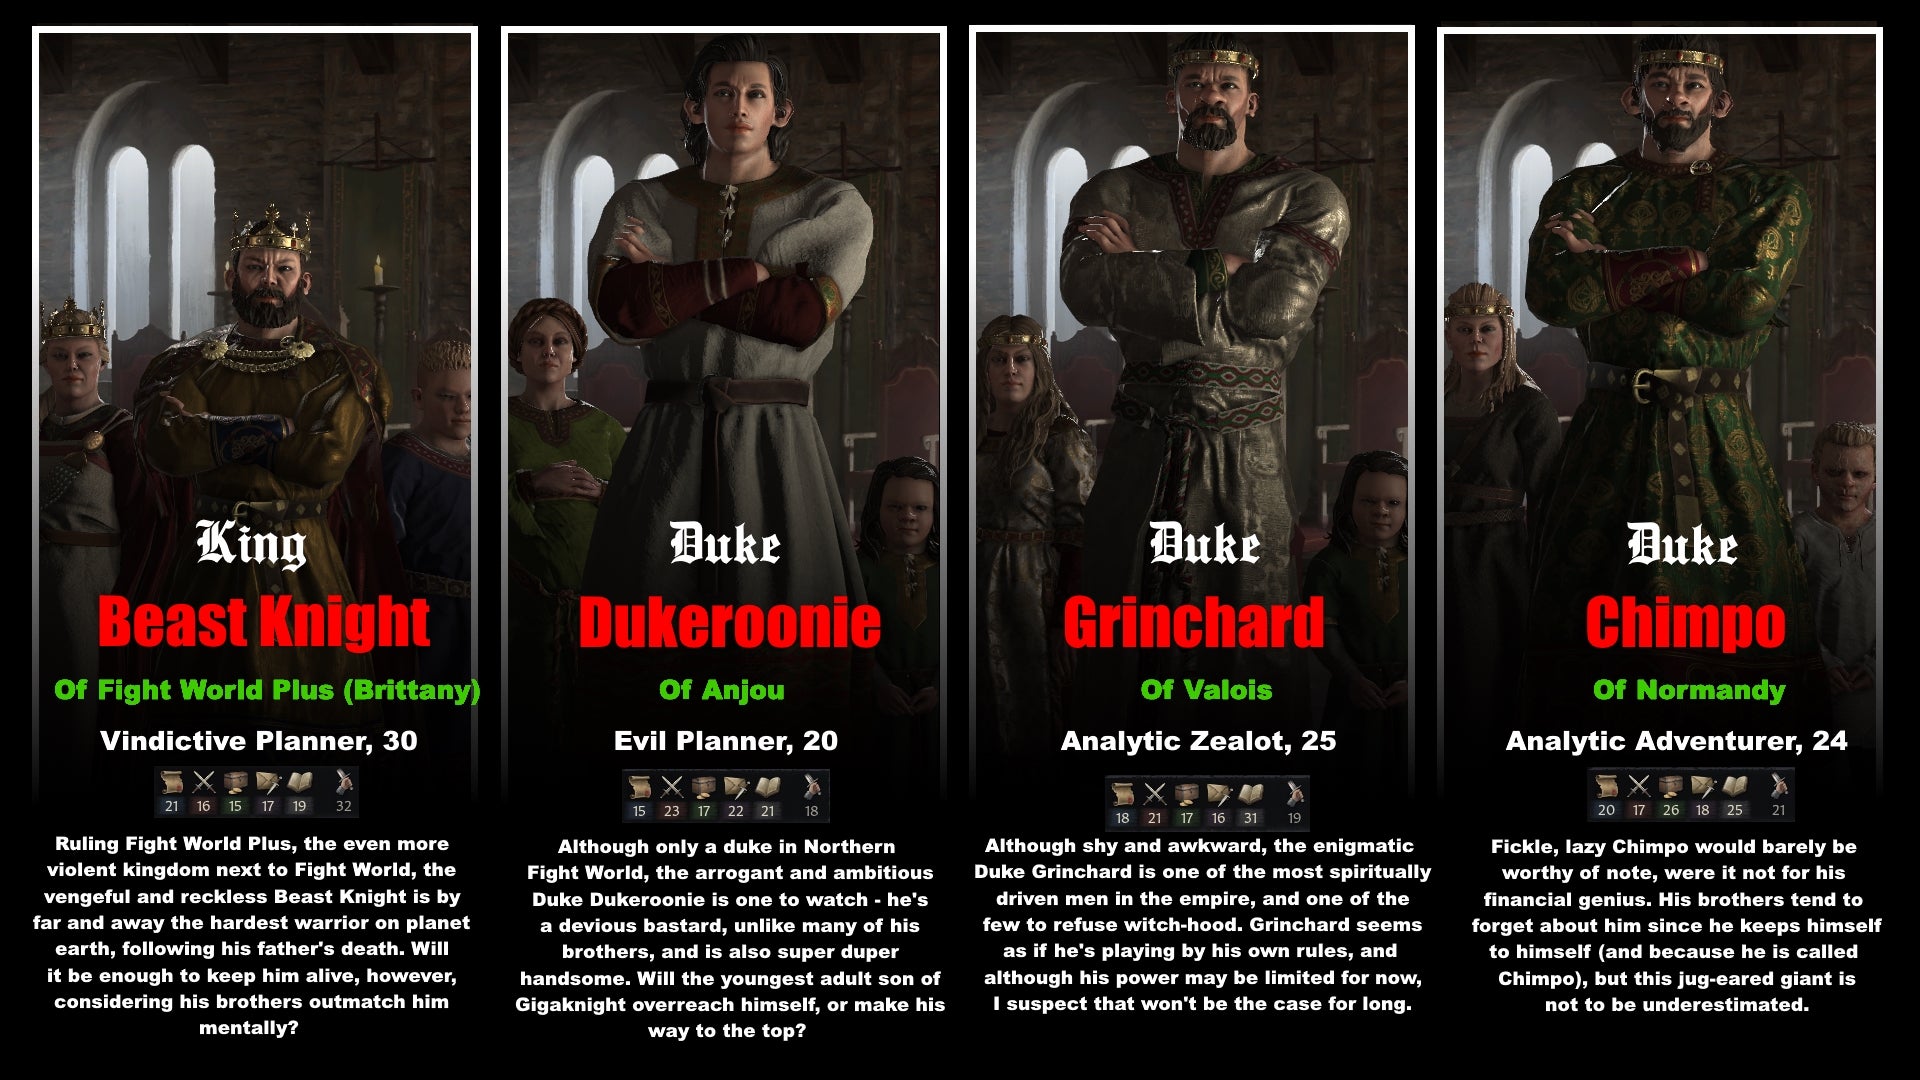 Portraits and flavour text for four of Gigaknight's descendants.